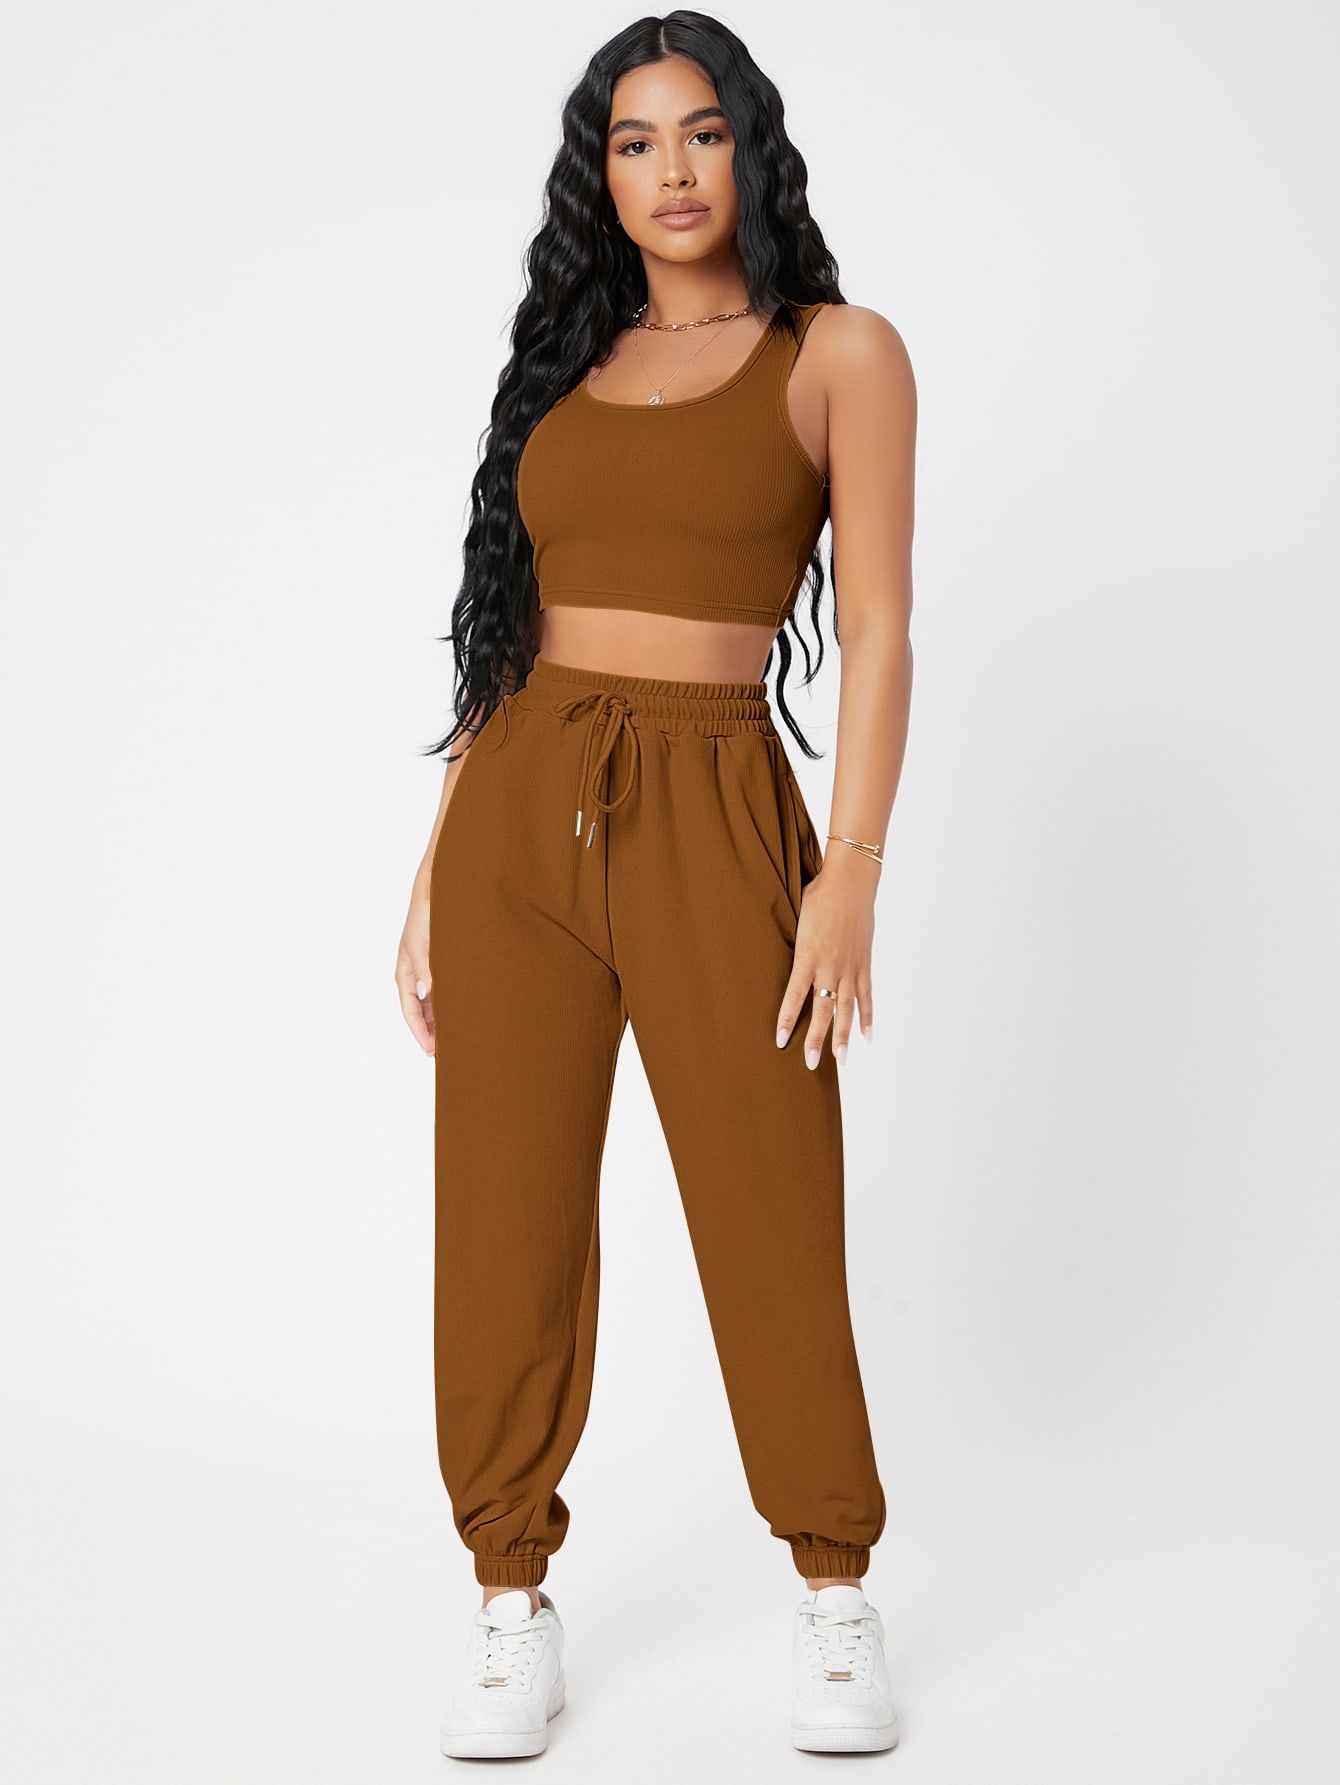 SHEIN Solid Crop Tank Top And Joggers Set | SHEIN